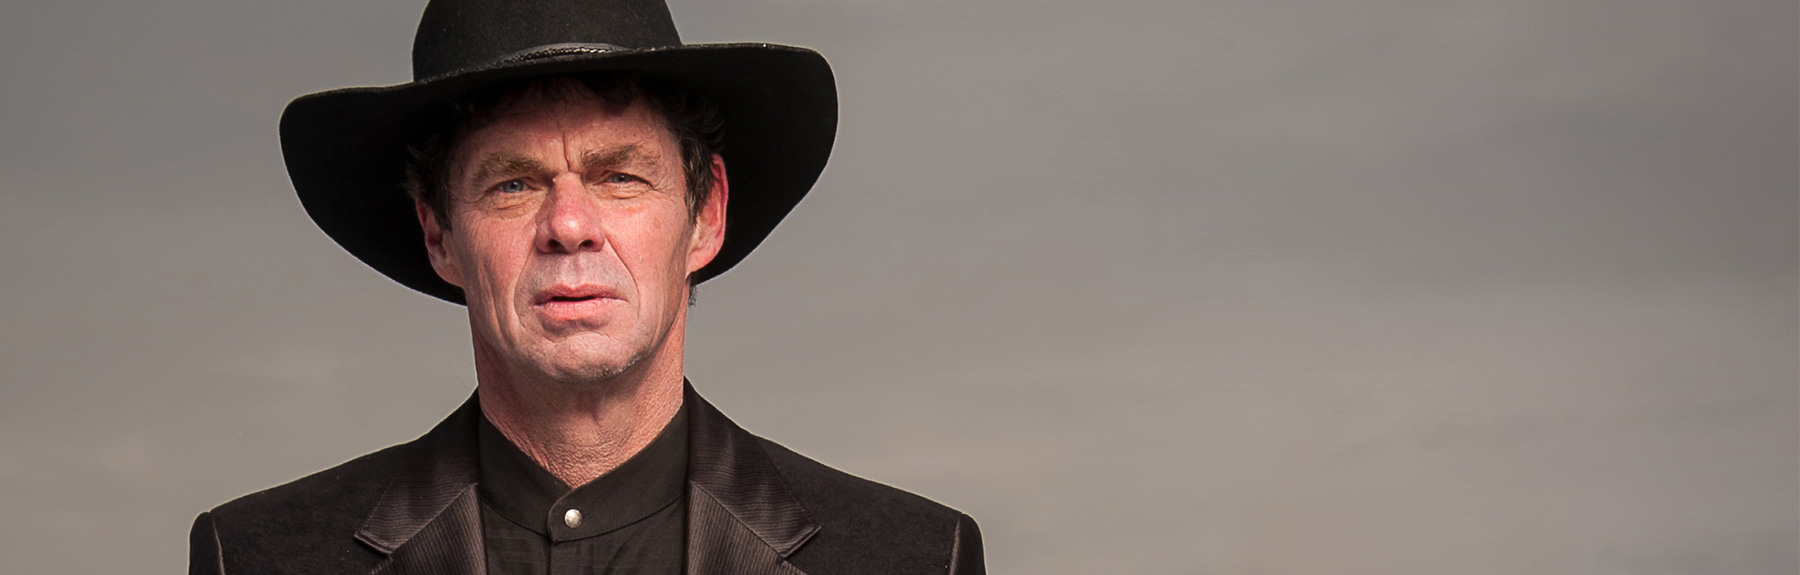 rich-hall-images